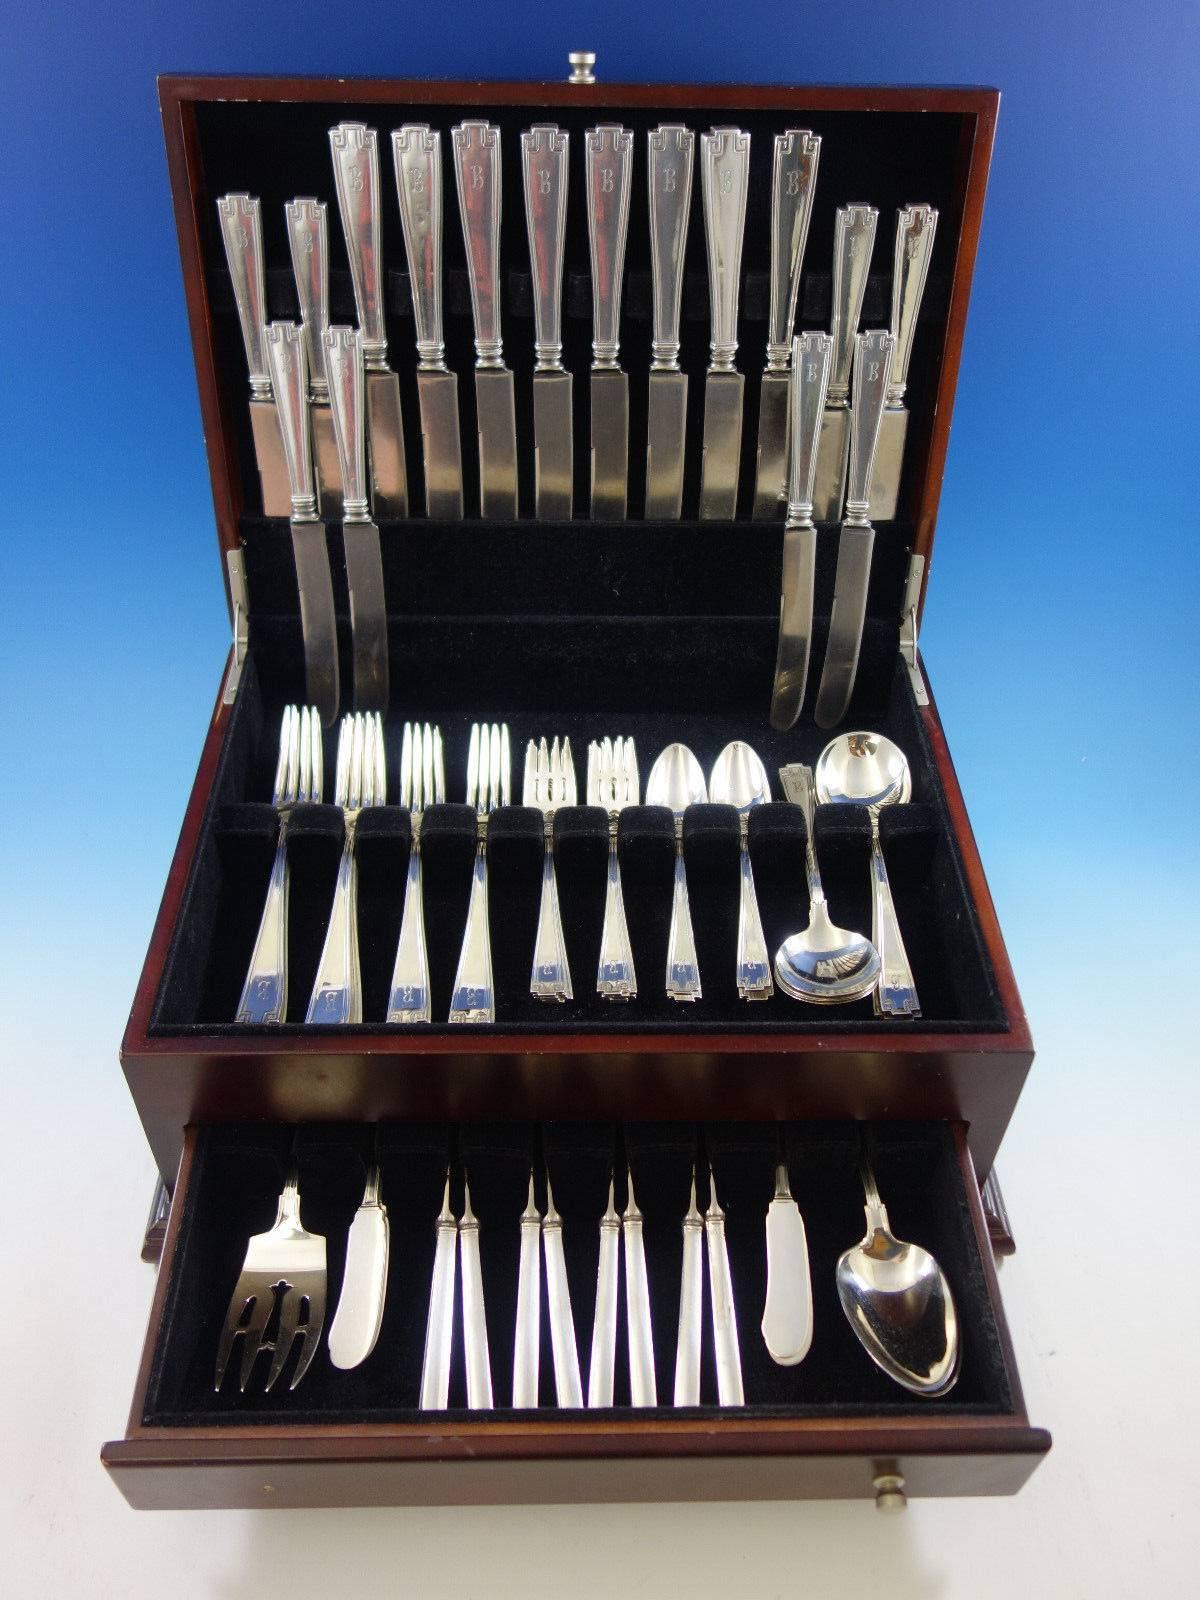 Etruscan by Gorham sterling silver flatware set of 75 pieces. This set includes: 

Eight dinner size knives, 9 3/4